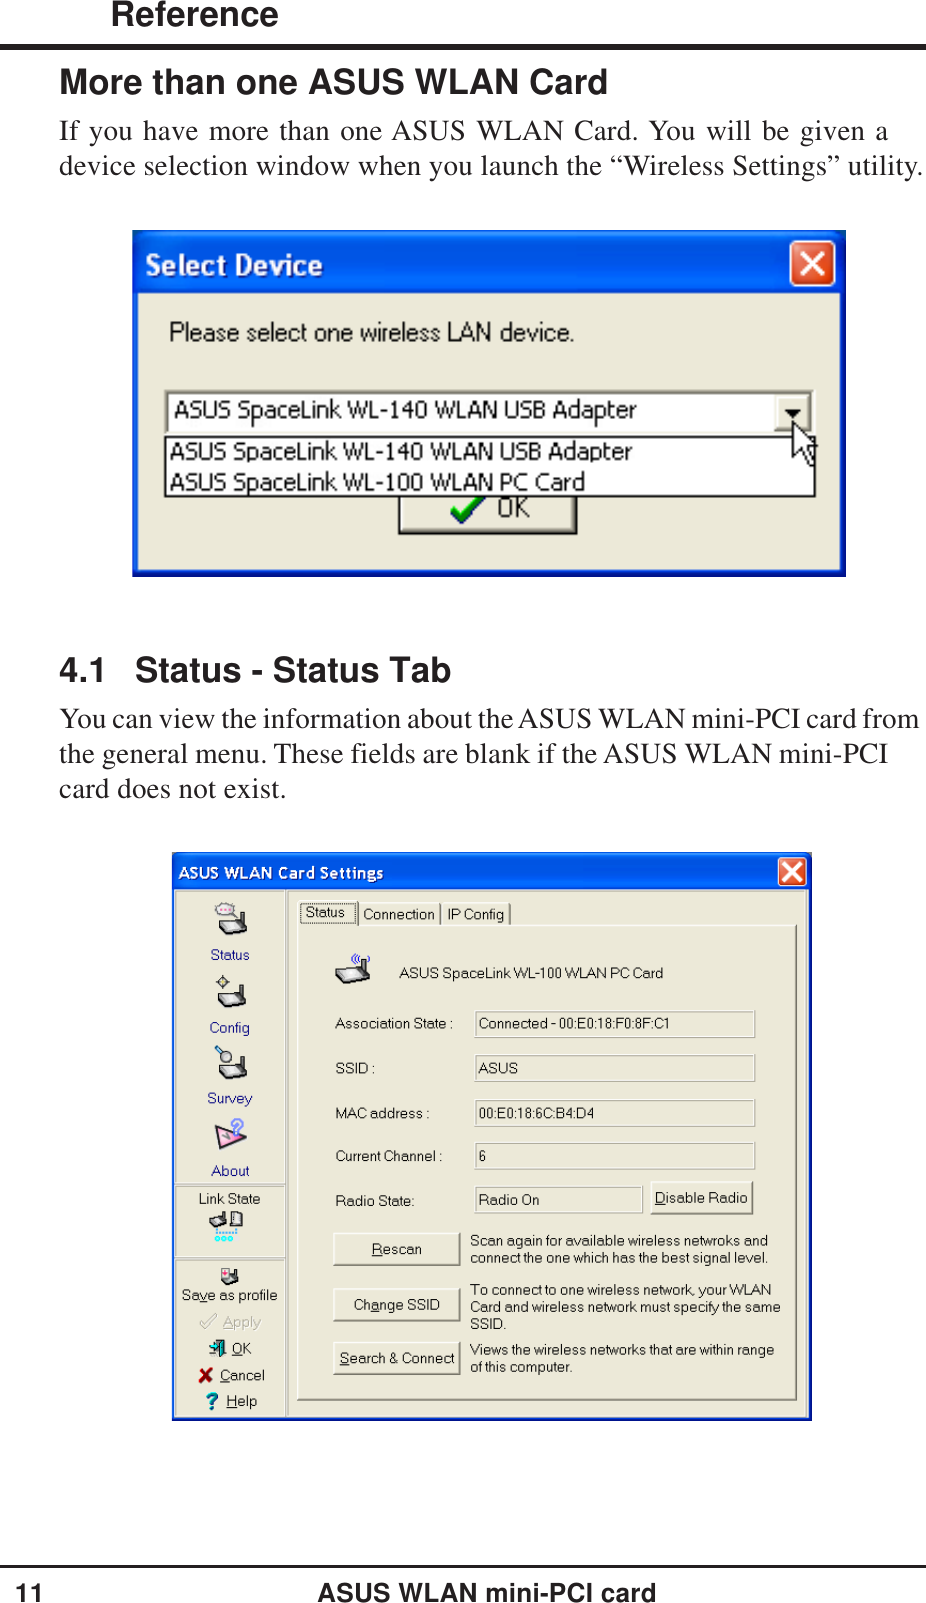 11 ASUS WLAN mini-PCI card ReferenceChapter 34.1 Status - Status TabYou can view the information about the ASUS WLAN mini-PCI card fromthe general menu. These fields are blank if the ASUS WLAN mini-PCI card does not exist.More than one ASUS WLAN CardIf you have more than one ASUS WLAN Card. You will be given adevice selection window when you launch the “Wireless Settings” utility.